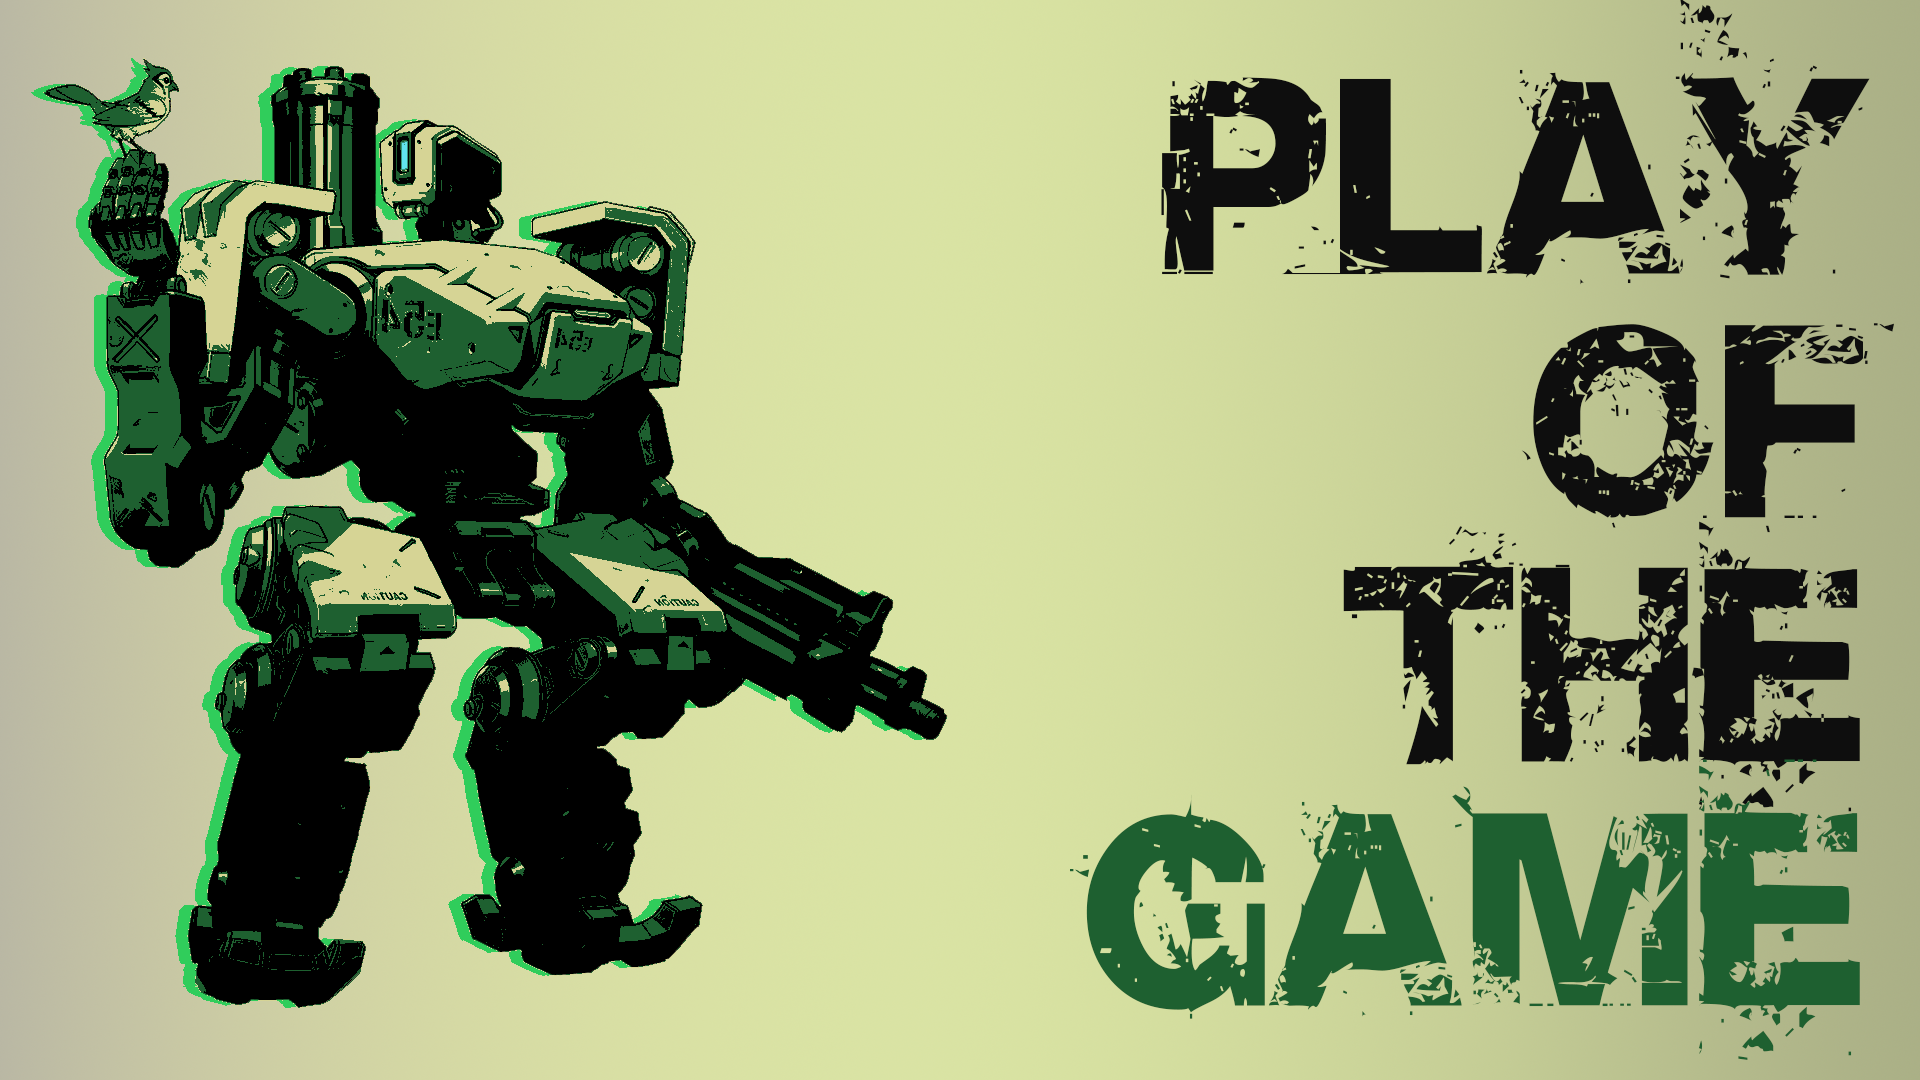 General 1920x1080 video games Overwatch Bastion (Overwatch) PC gaming typography